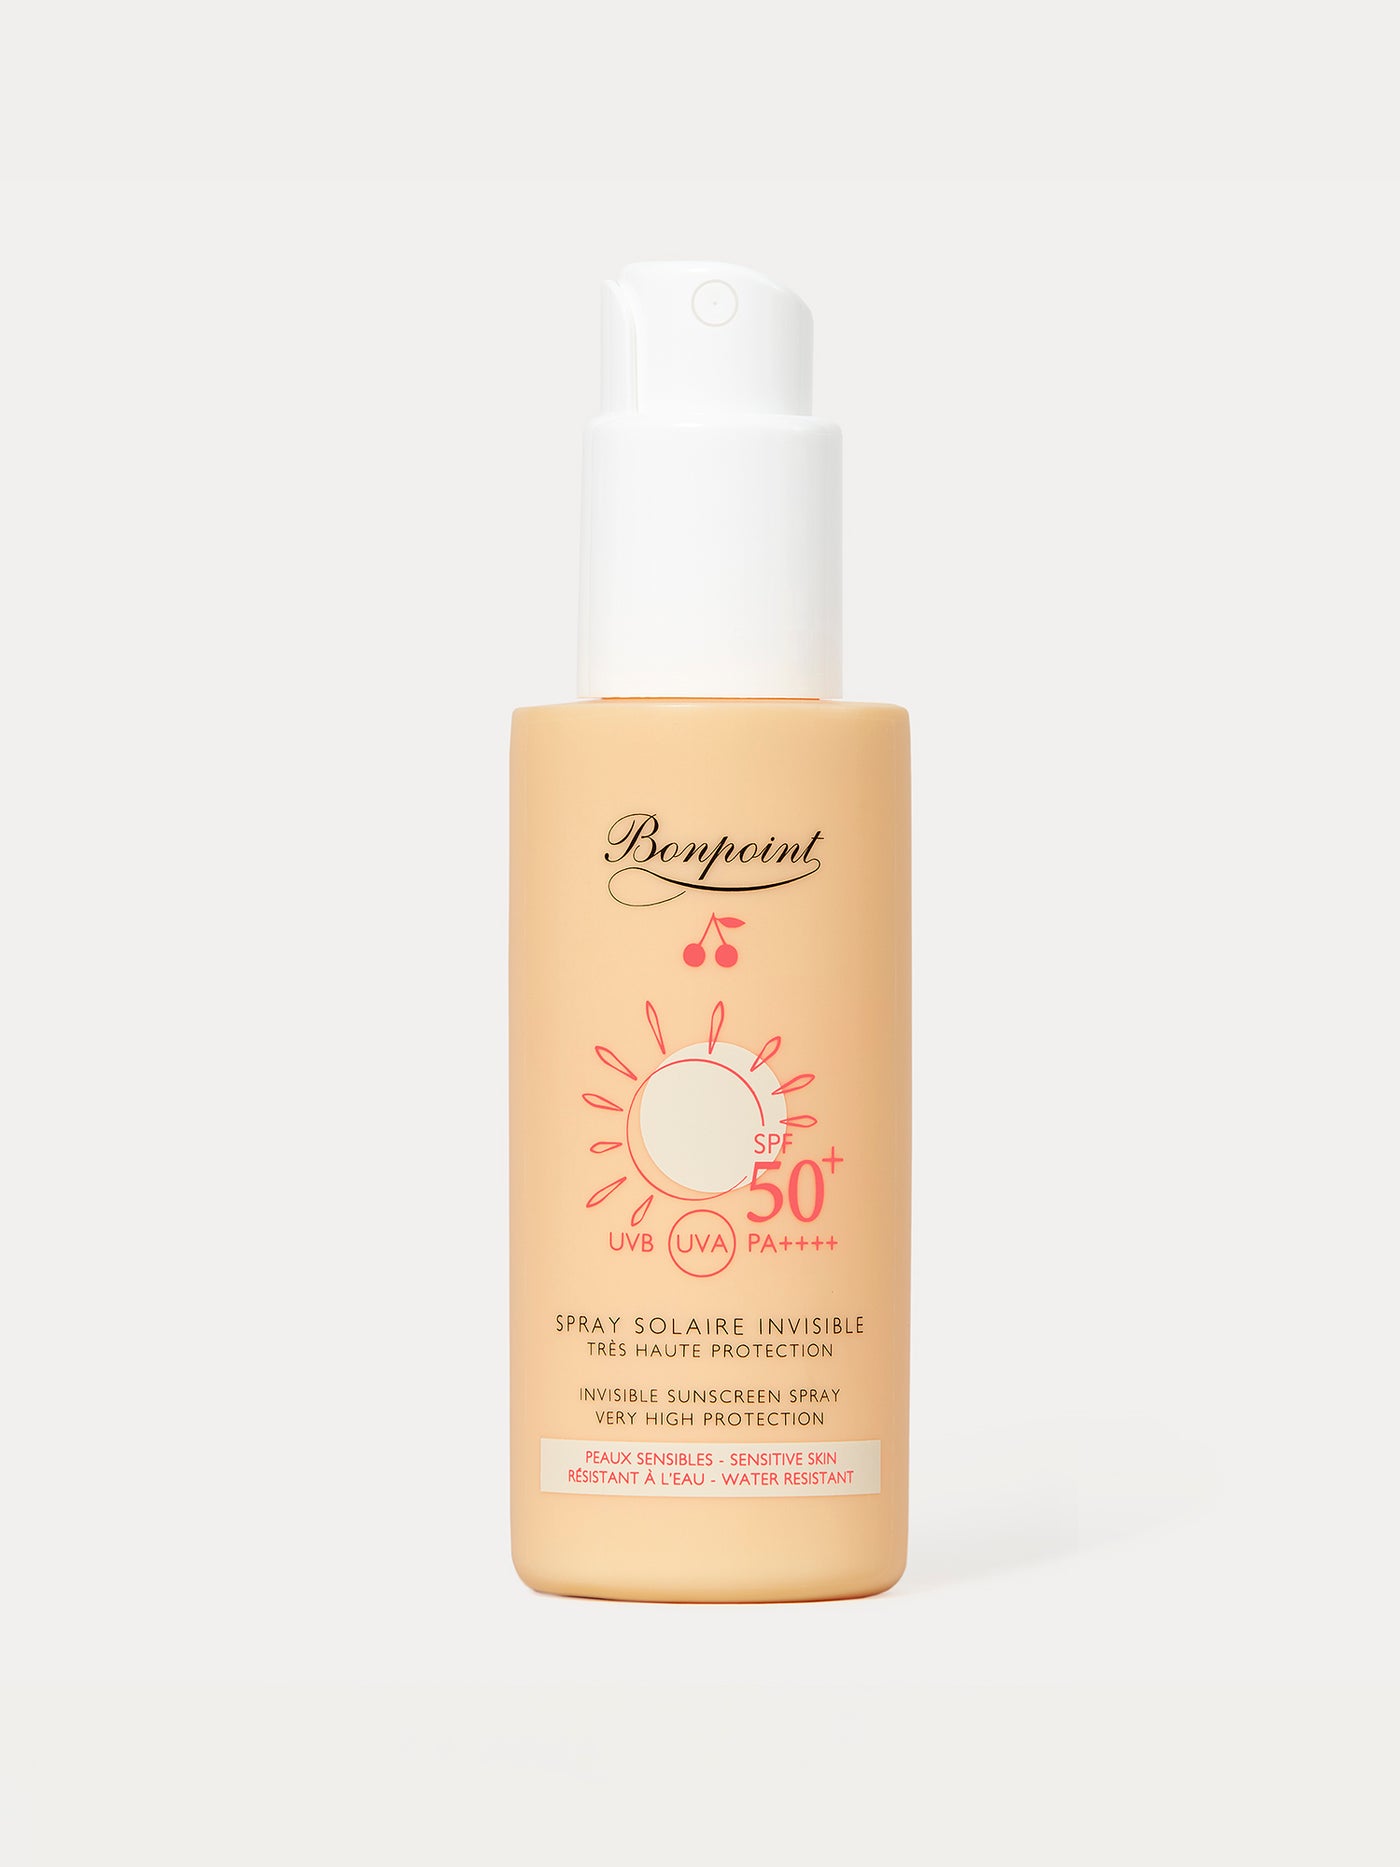 Sunscreen duo family pack